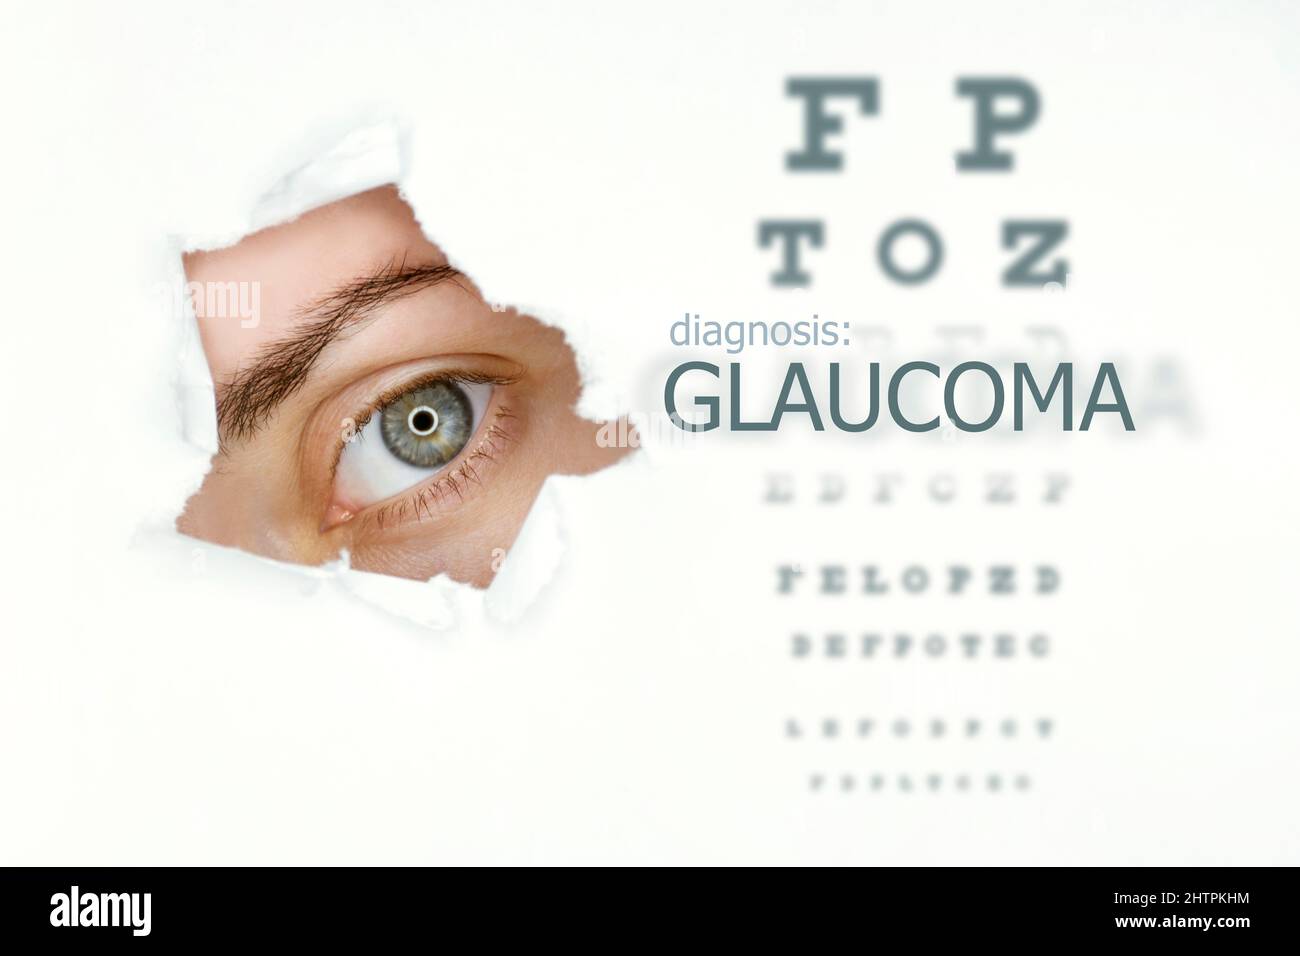 Glaucoma disease poster with eye test and blue eye on left. Isolated on white Stock Photo